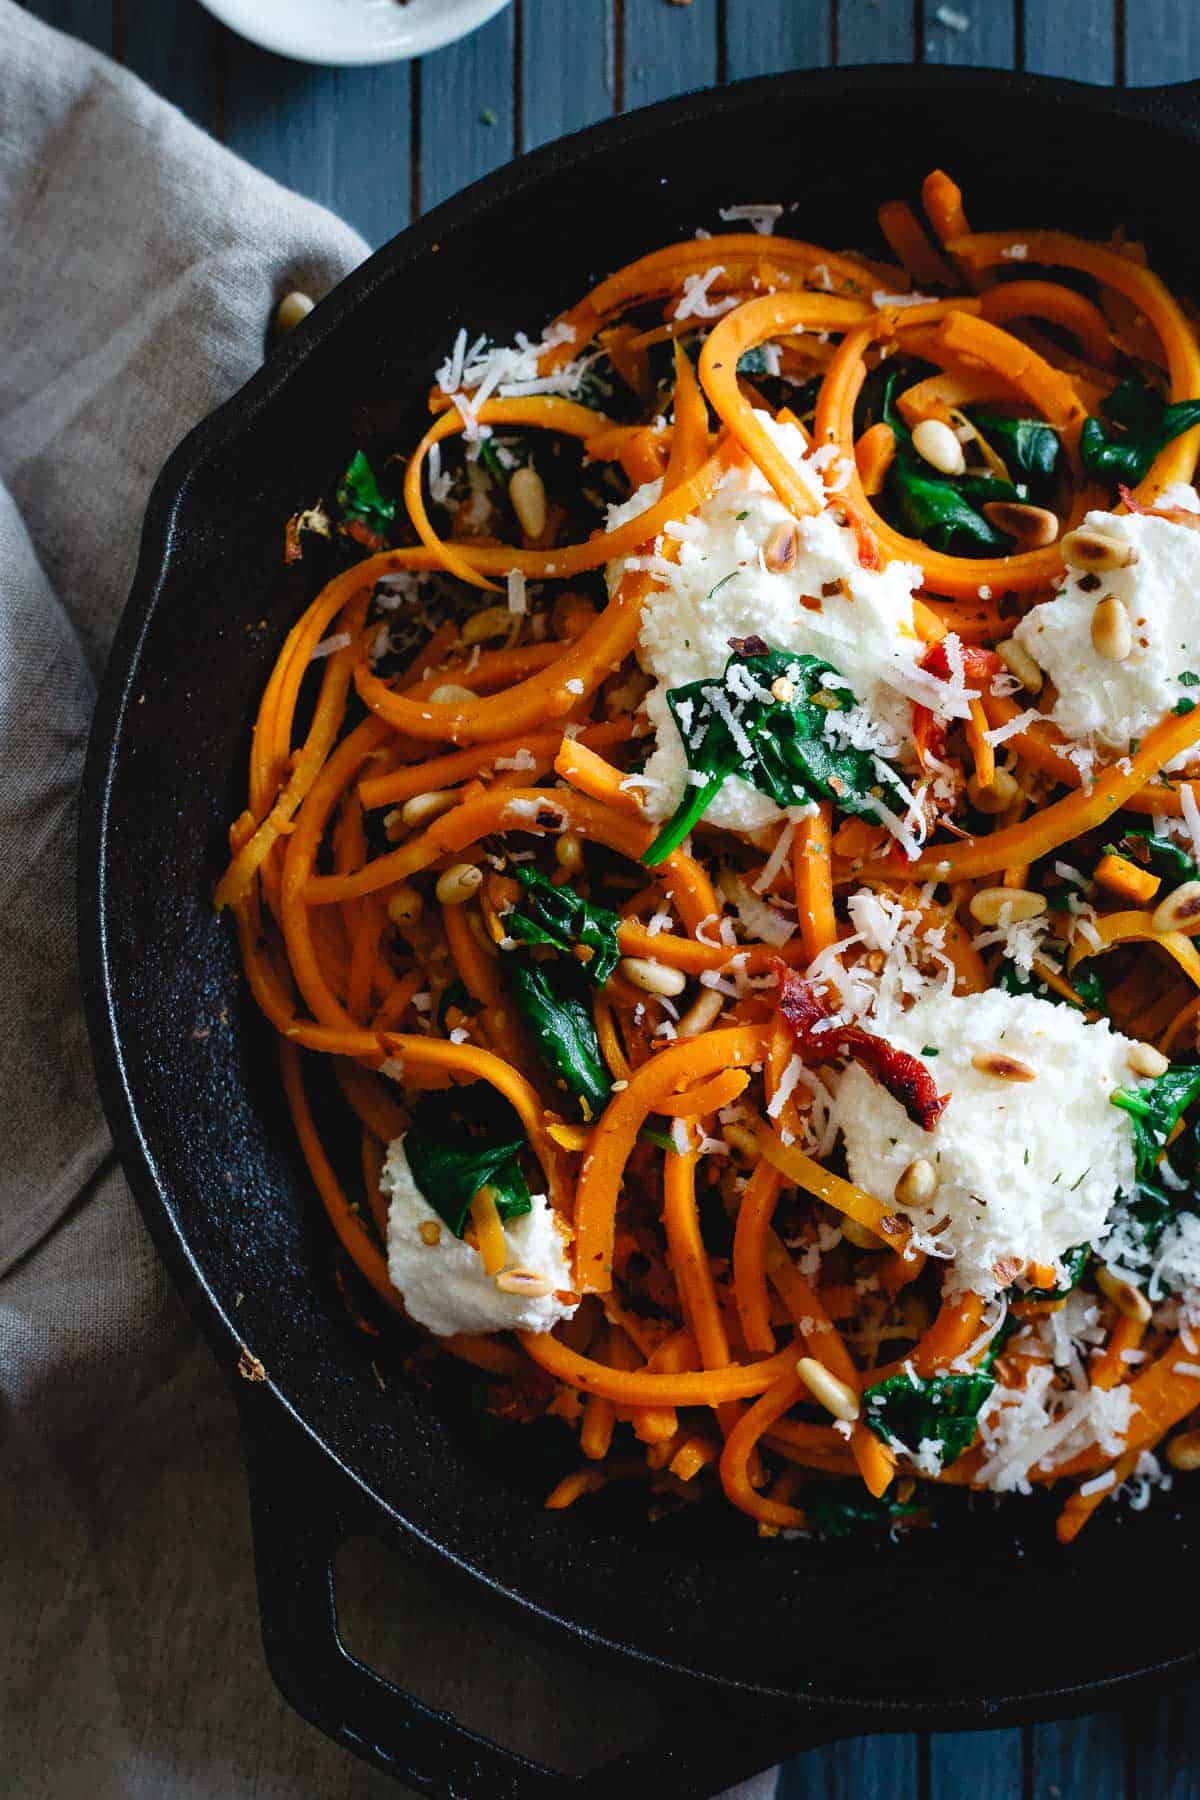 These garlicky butternut squash noodles are a simple winter one skillet meal packed with flavor.